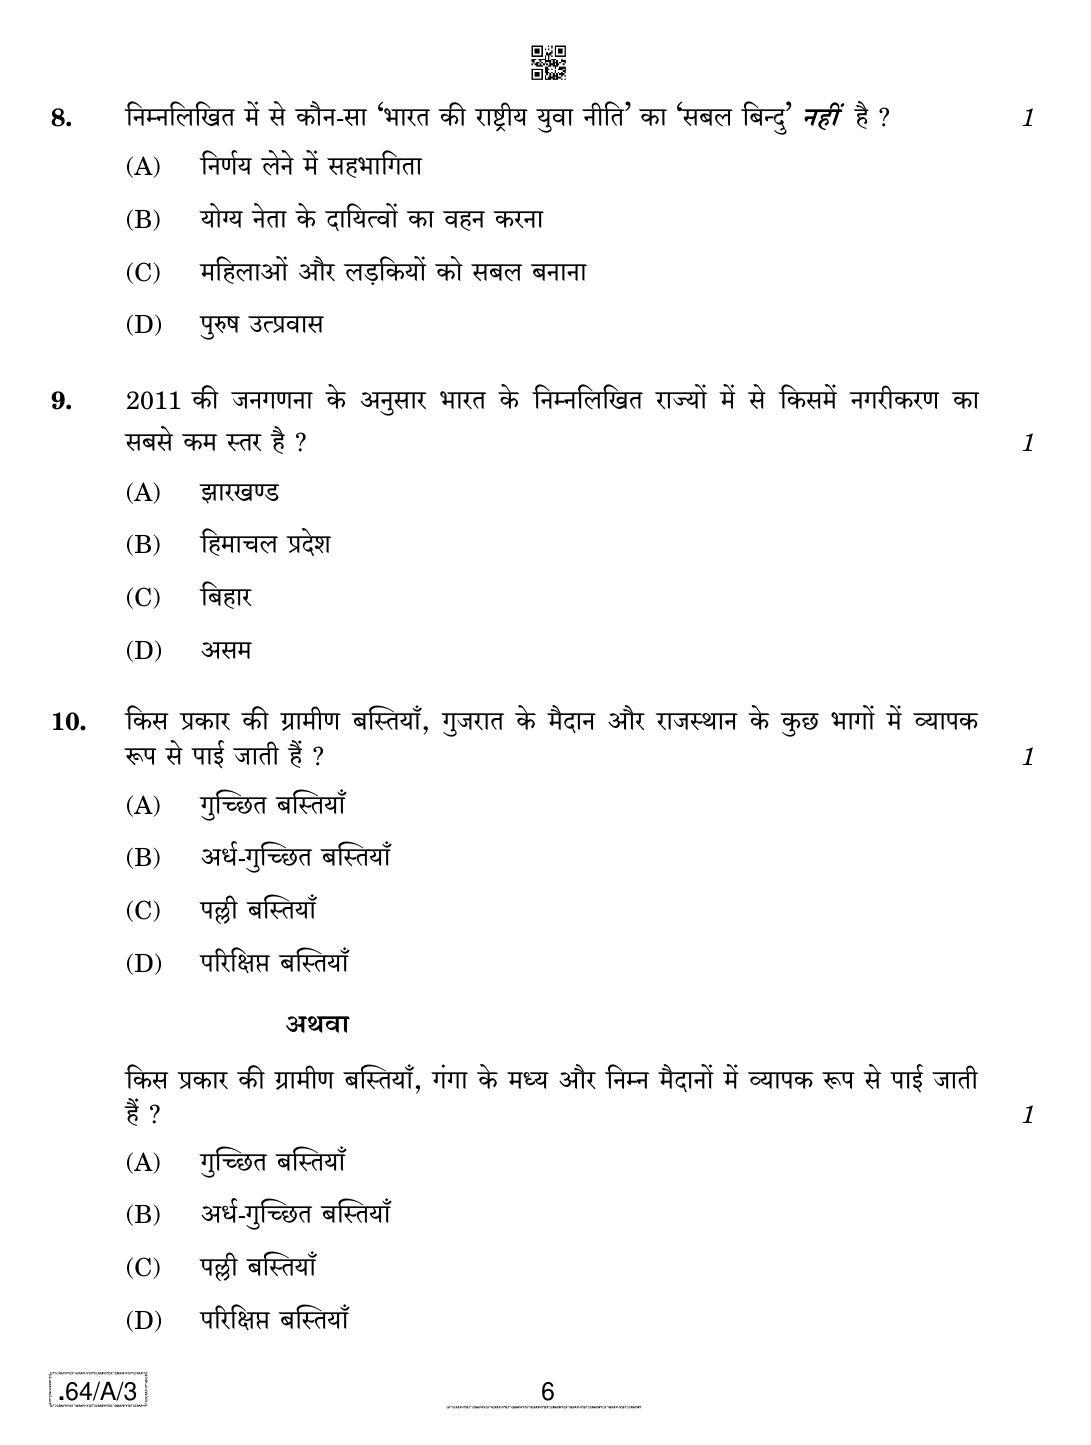 CBSE Class 12 64-C-3 - Geography 2020 Compartment Question Paper - Page 6